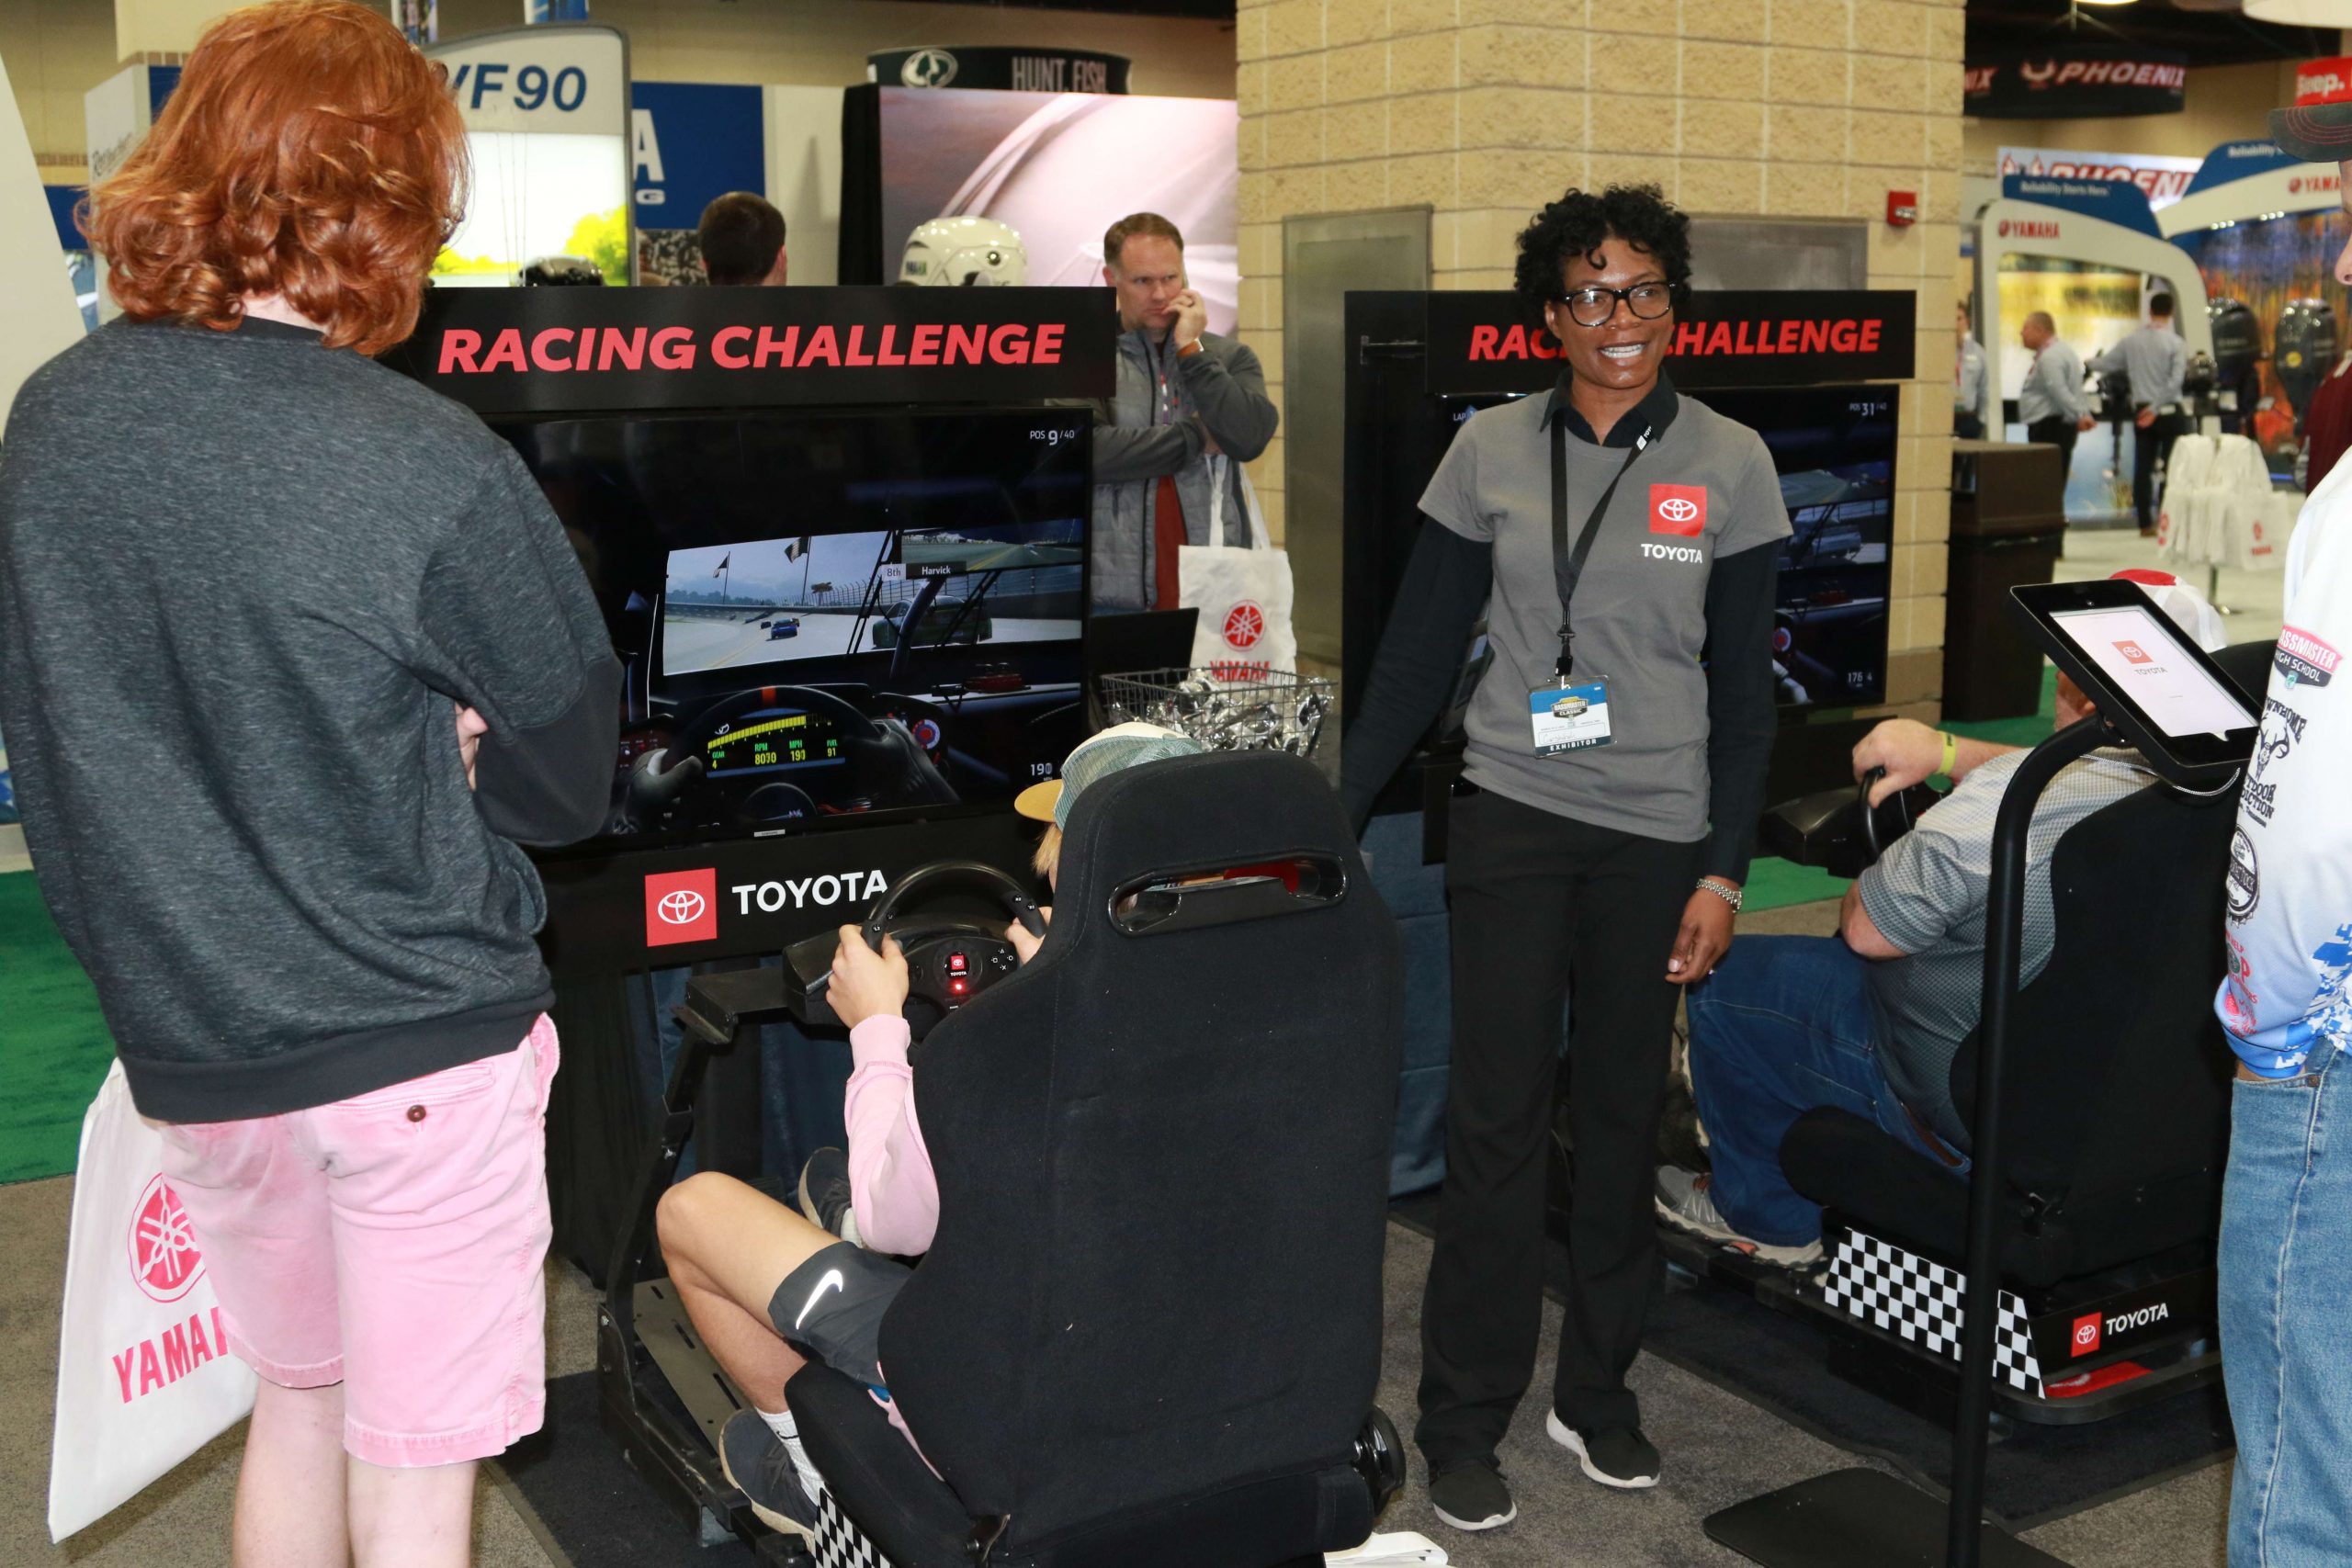 At the Toyota booth, Expo visitors enjoyed taking a spin around the track in the Racing Challenge.